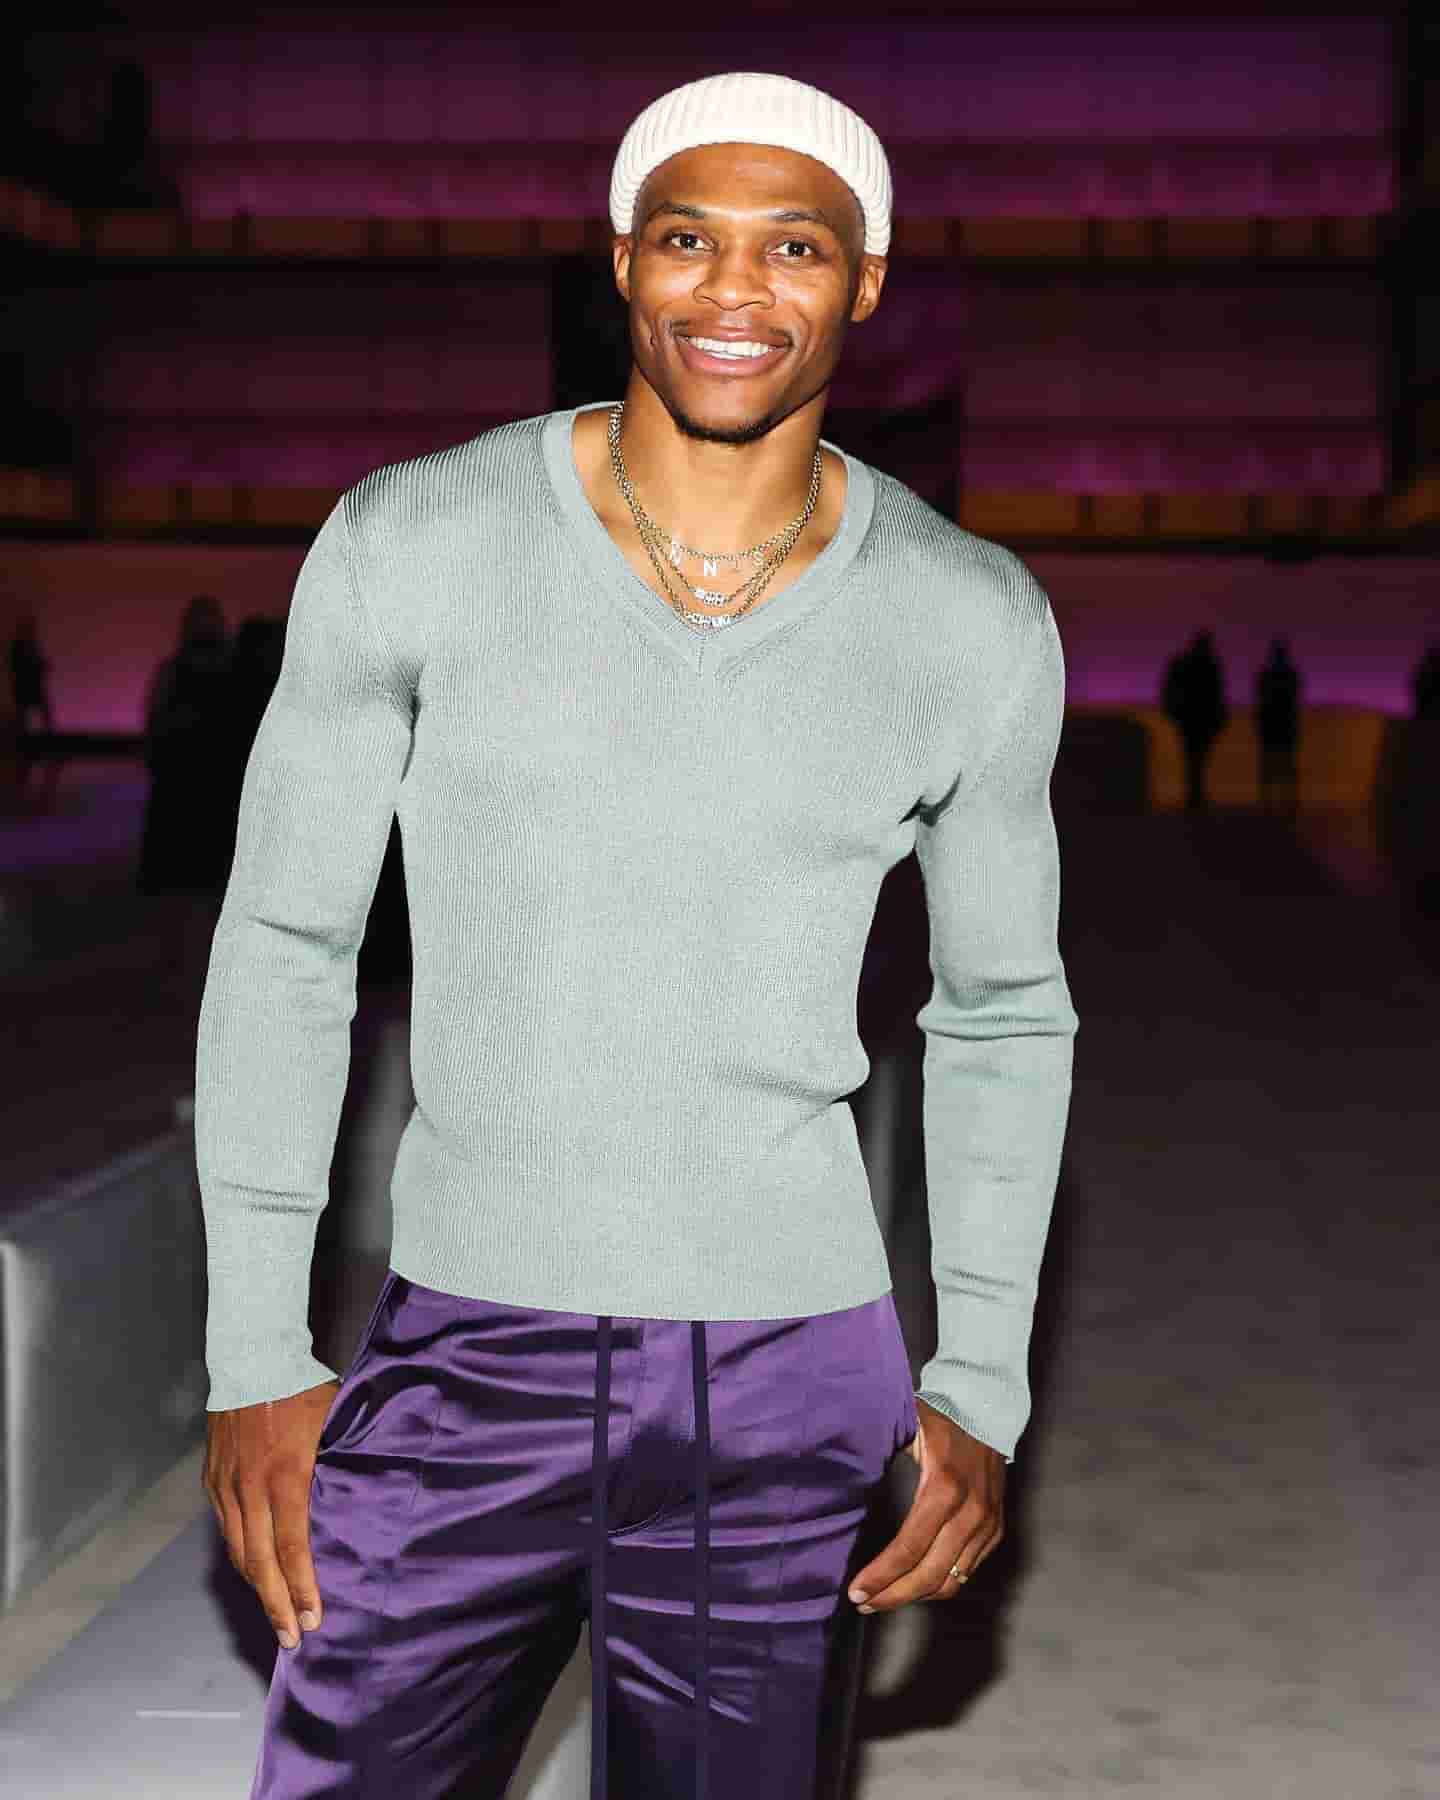 Russell Westbrook early life, Russell Westbrook career, Russell Westbrook social media, Russell Westbrook personal life, Russell Westbrook biography, Russell Westbrook, Russell Westbrook net worth 2023, Russell Westbrook net worth